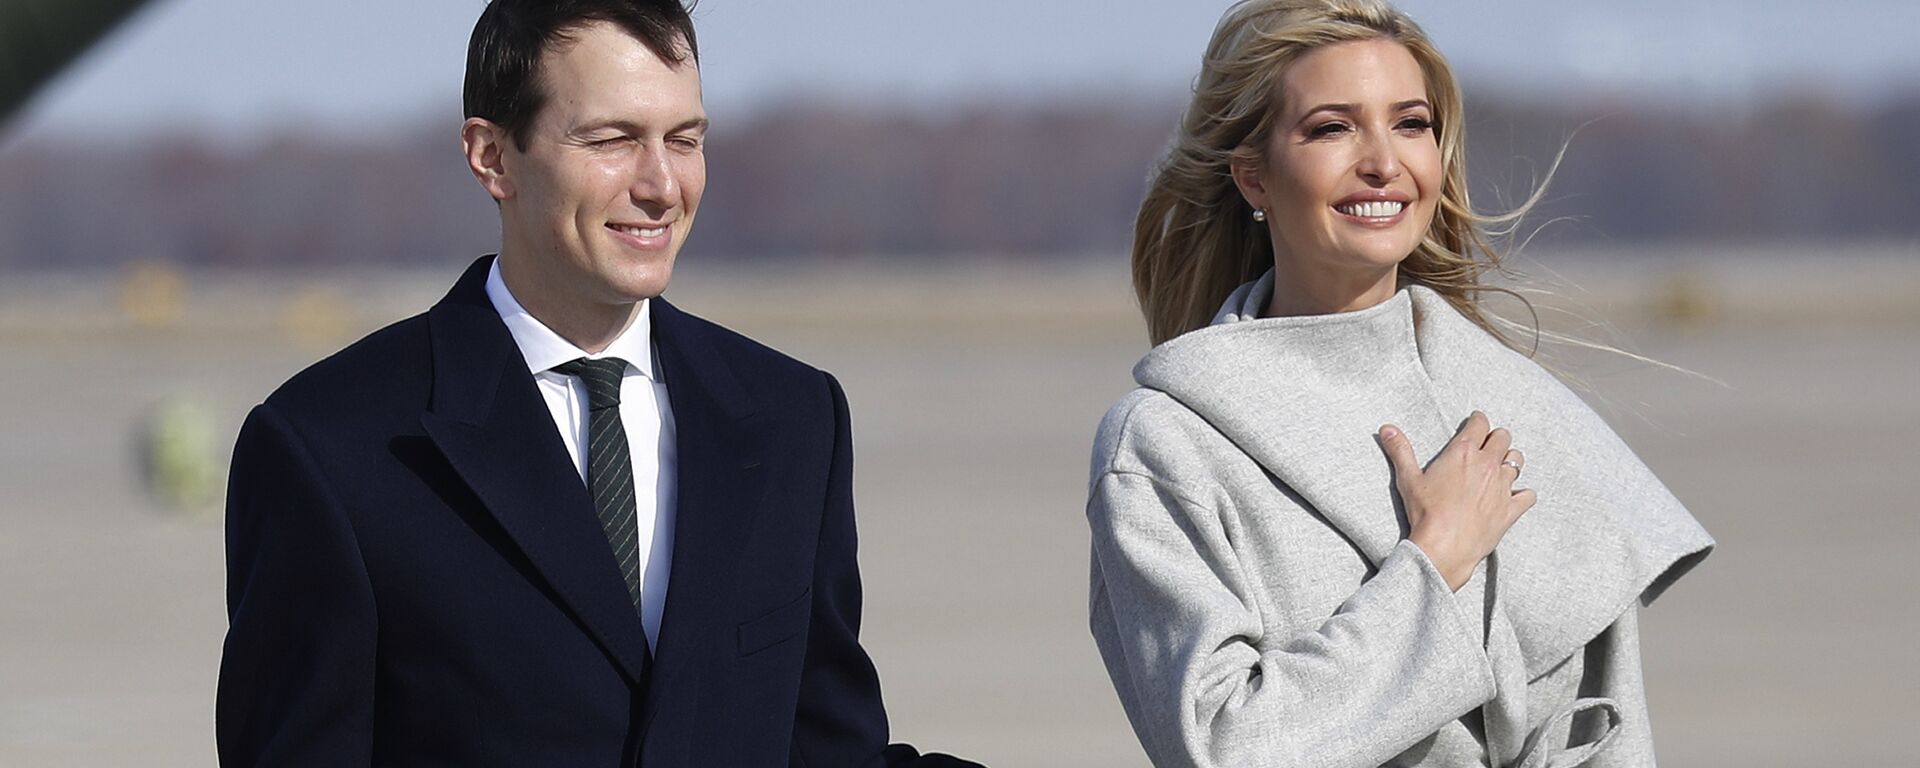 White House Senior Adviser Jared Kushner, left and Ivanka Trump, the daughter and assistant to President Donald Trump walk across the tarmac before boarding Air Force One, Thursday, Nov. 29, 2018 at Andrews Air Force Base, Md. - Sputnik International, 1920, 11.10.2021